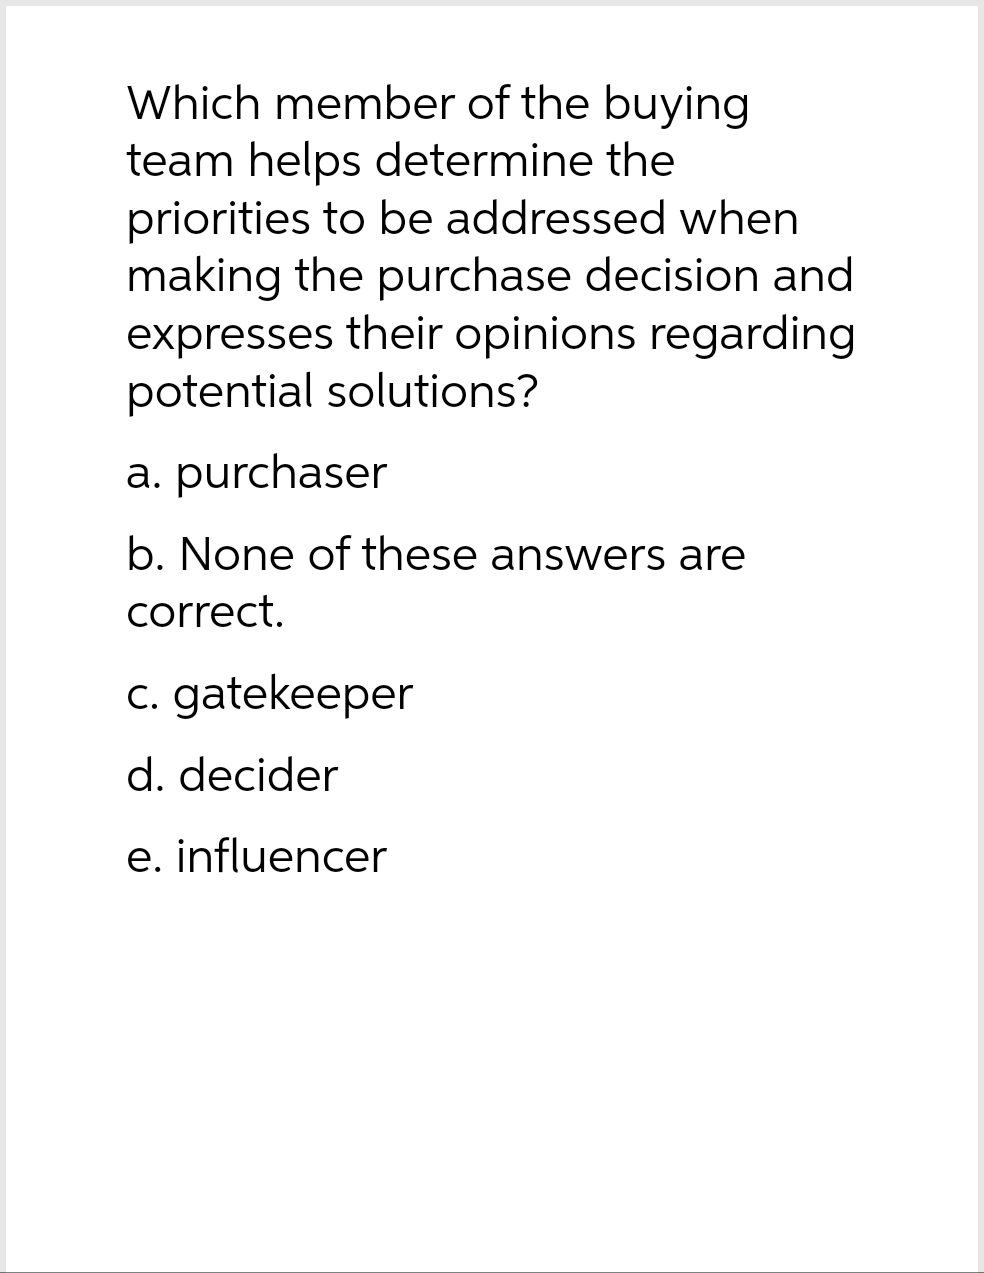 Which member of the buying
team helps determine the
priorities to be addressed when
making the purchase decision and
expresses their opinions regarding
potential solutions?
a. purchaser
b. None of these answers are
correct.
c. gatekeeper
d. decider
e. influencer